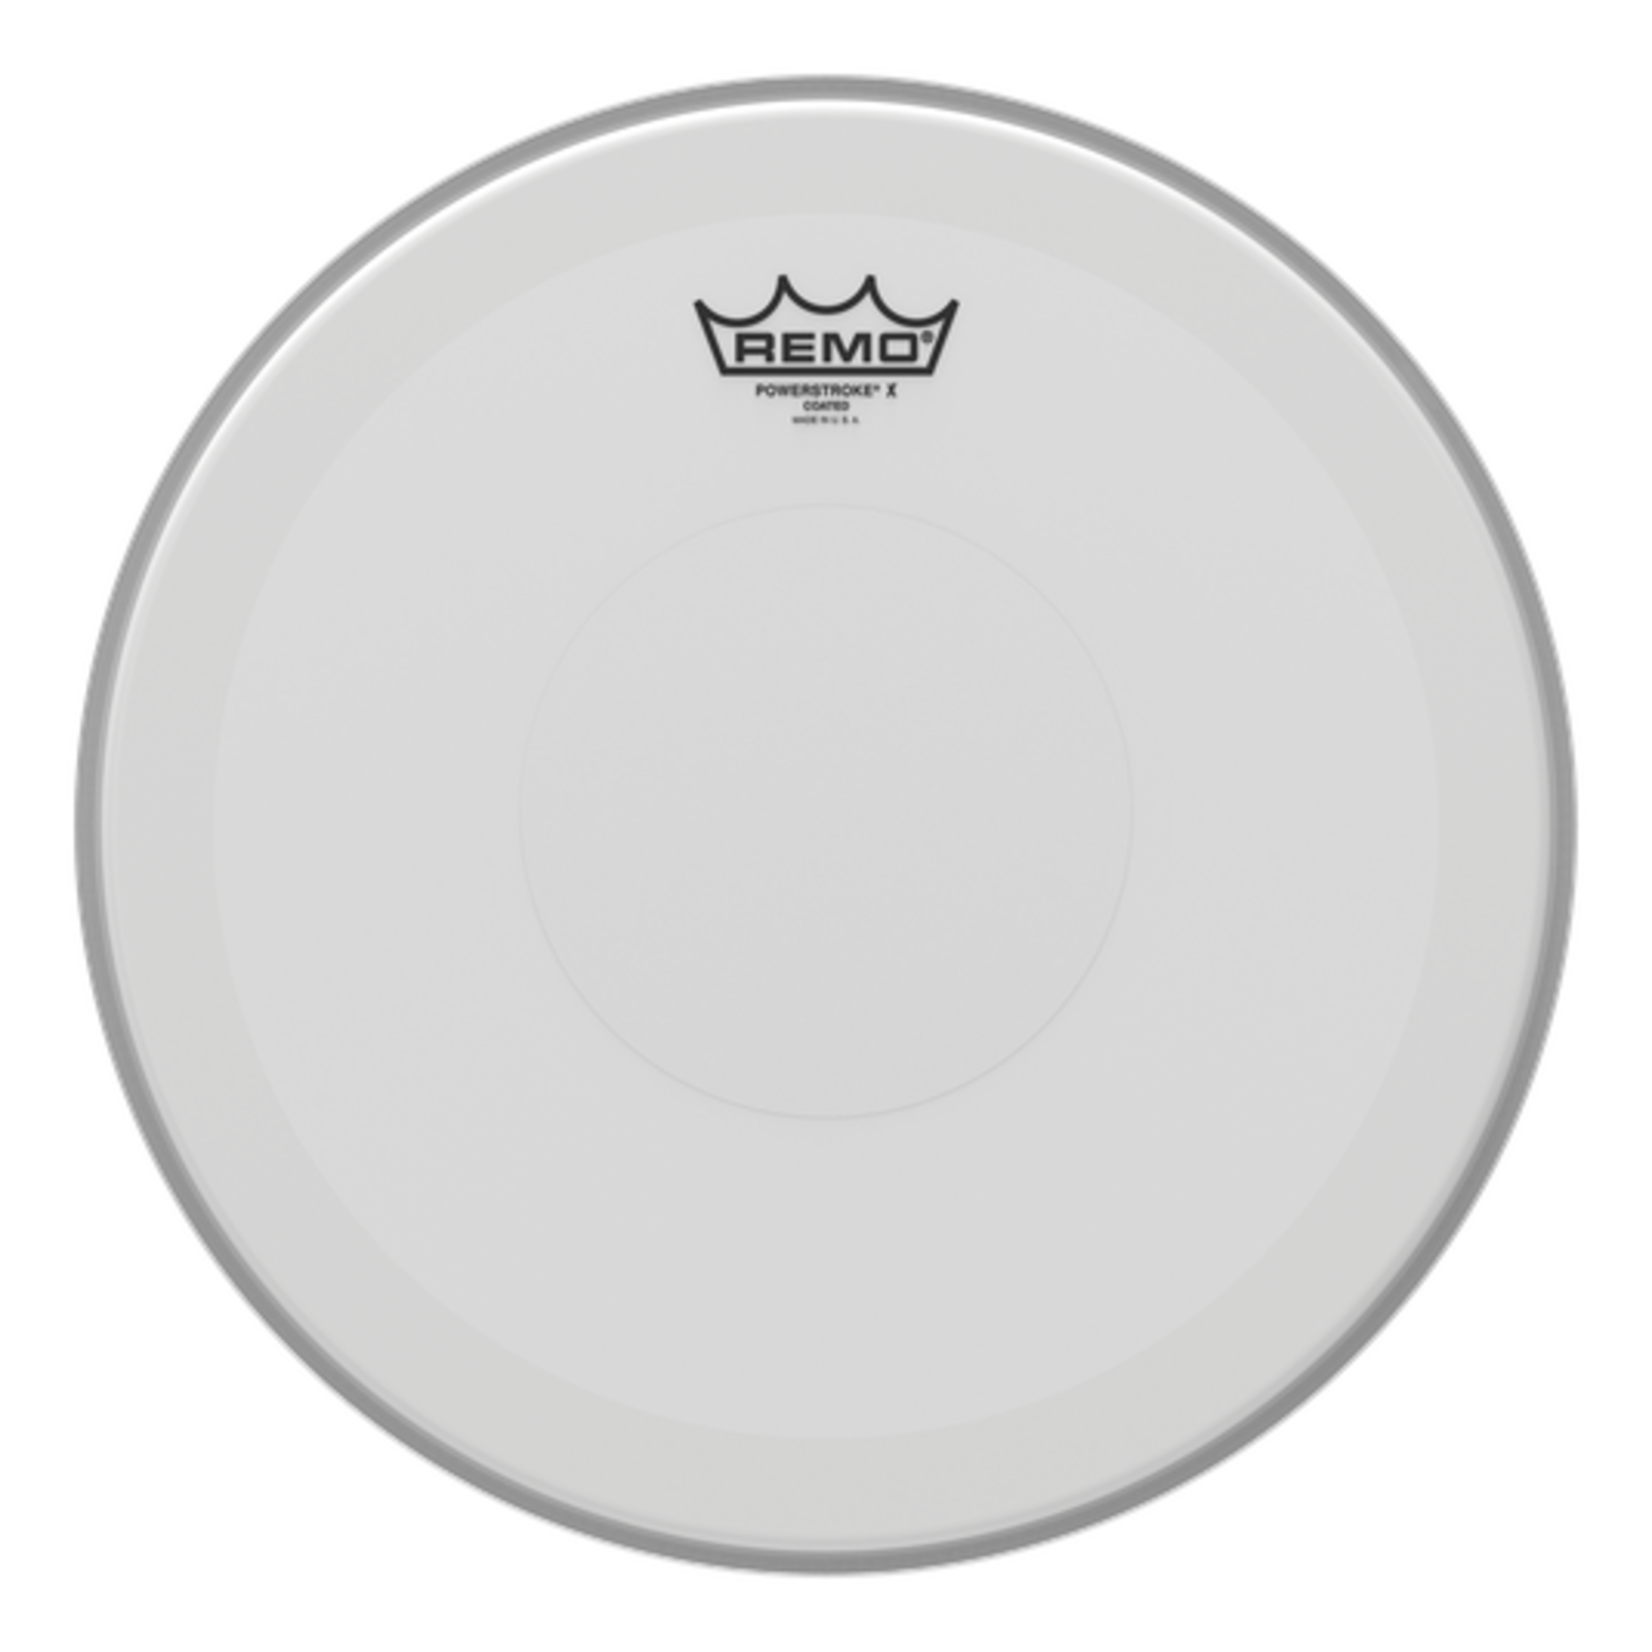 Remo Remo 14" Powerstroke X Coated With Dot Drumhead PX0114C2